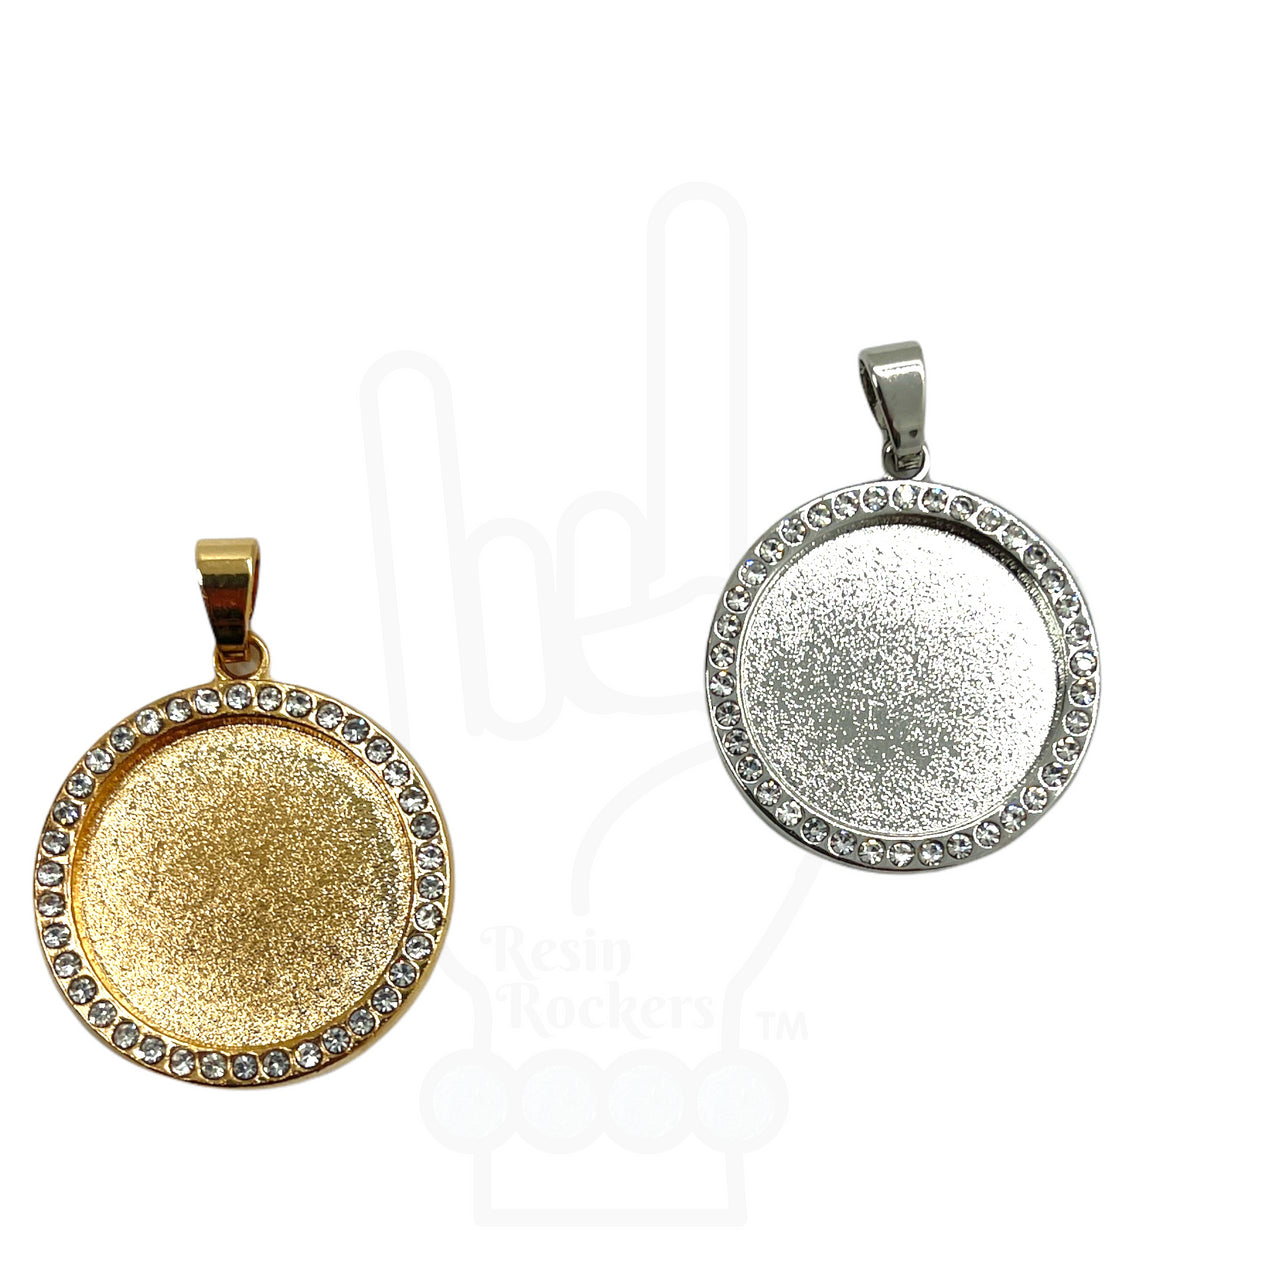 20mm Round Bezel with Rhinestones & Pinch Clips Pendant Blank for UV or Epoxy Resin